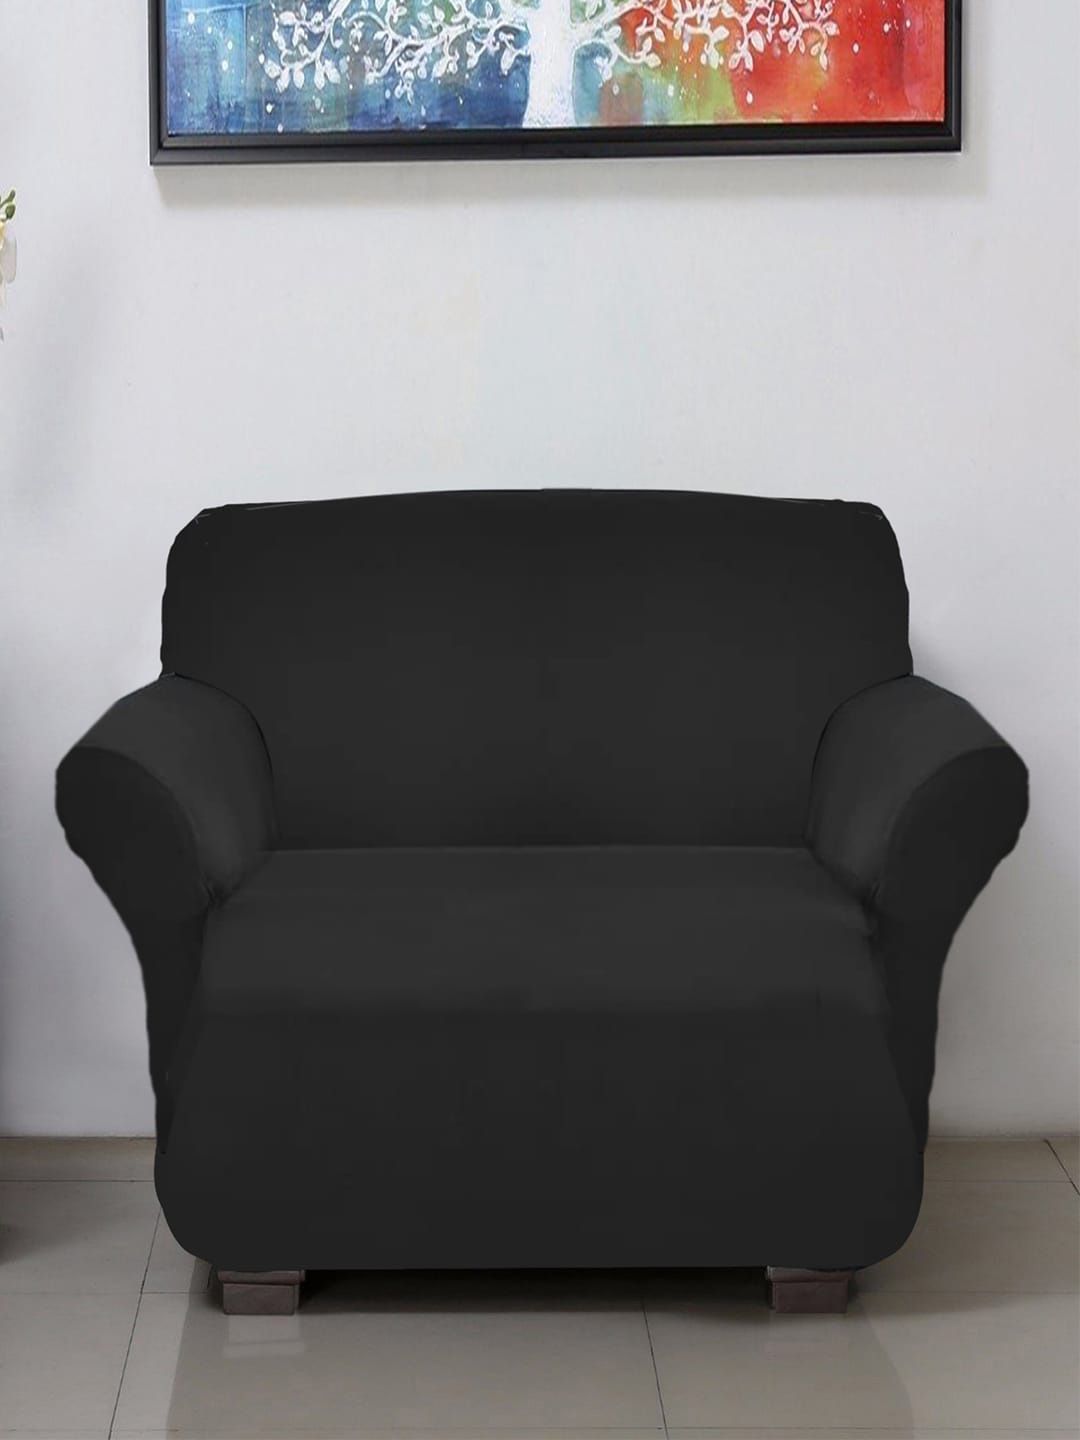 Kuber Industries Black Solid One Seater Sofa Covers Price in India